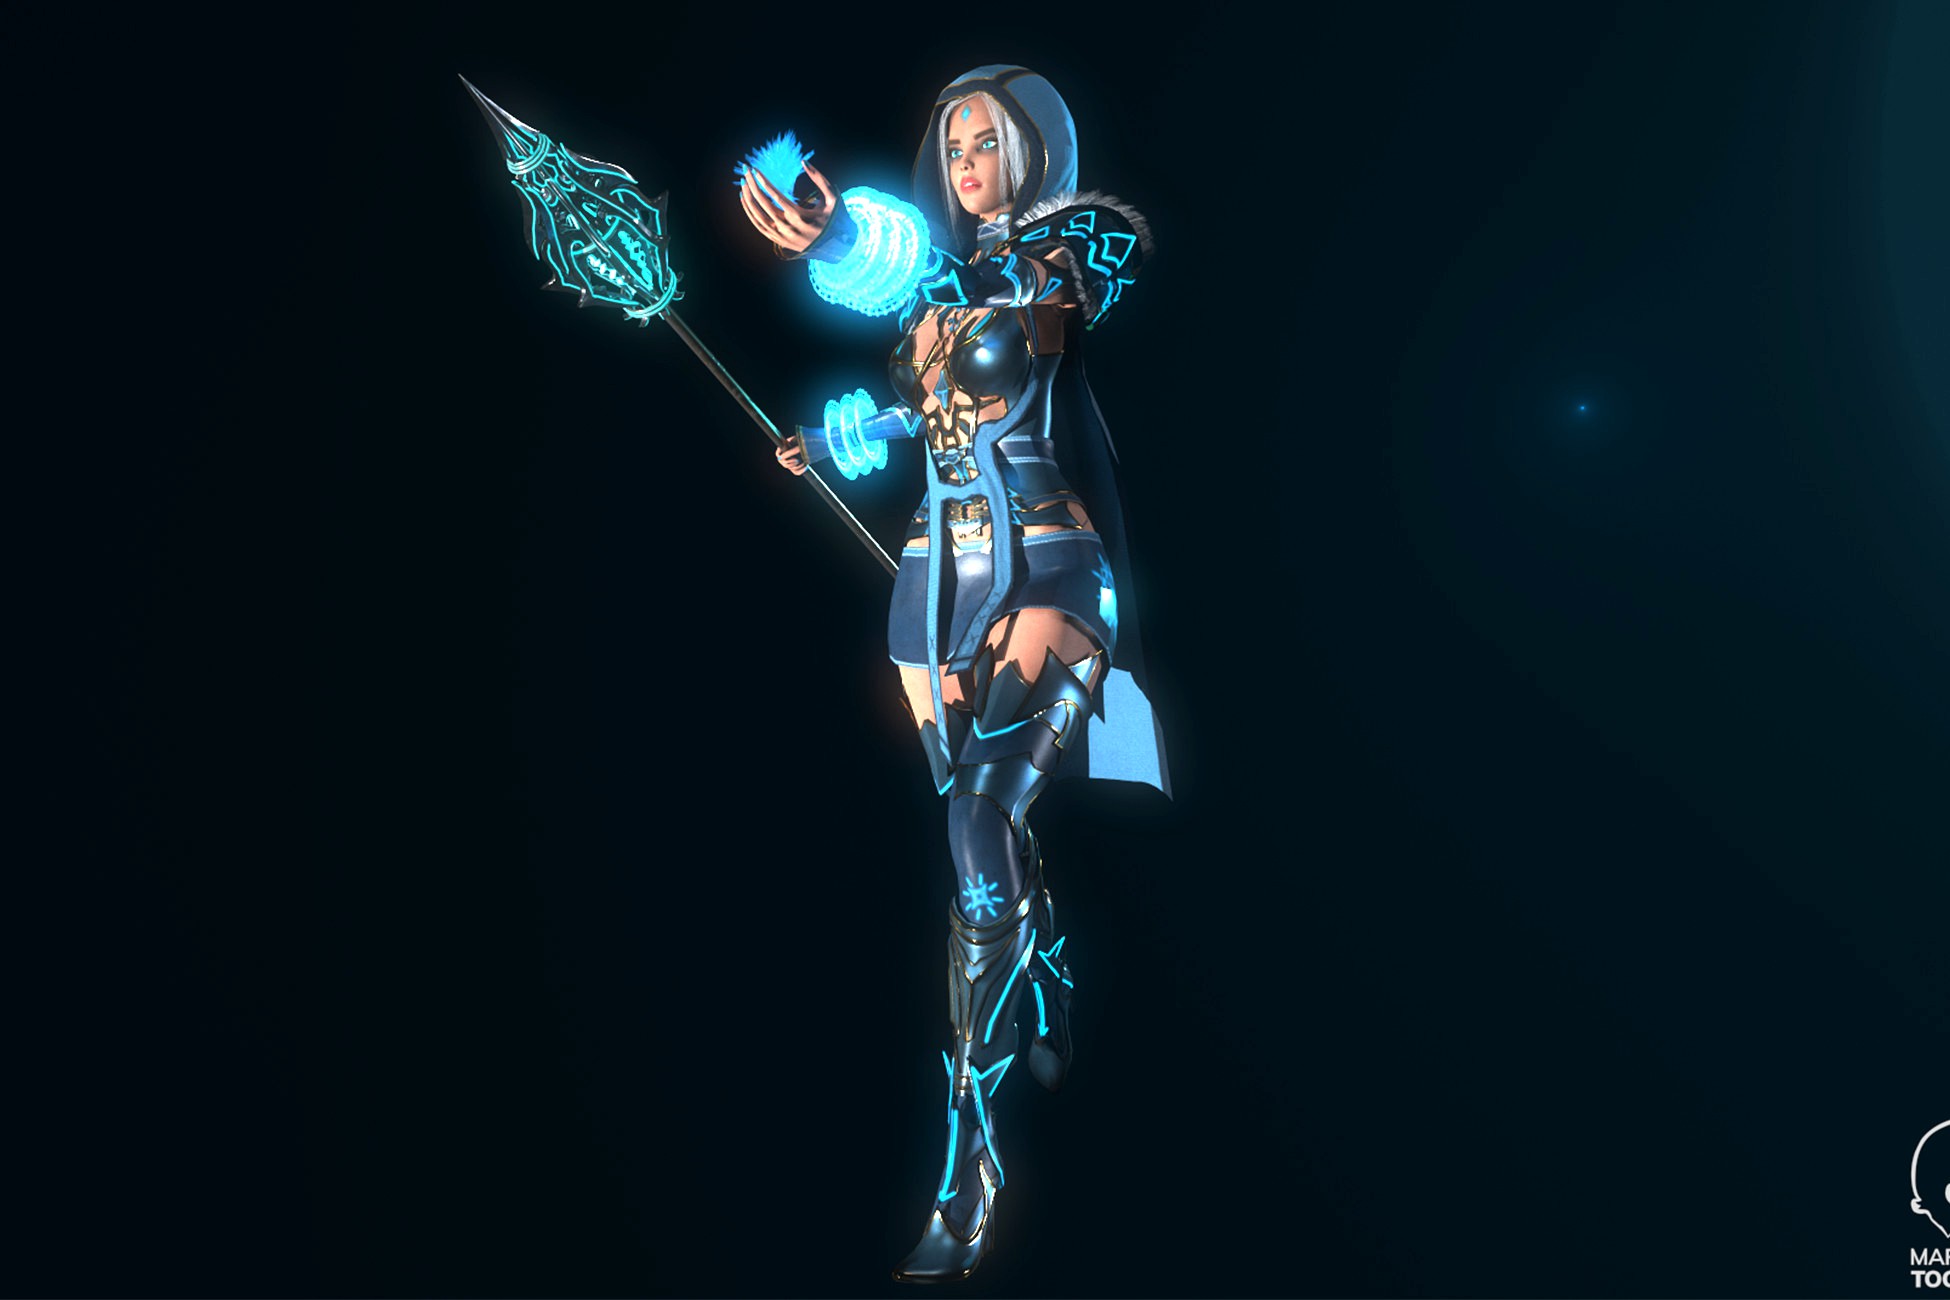 Frost Mage